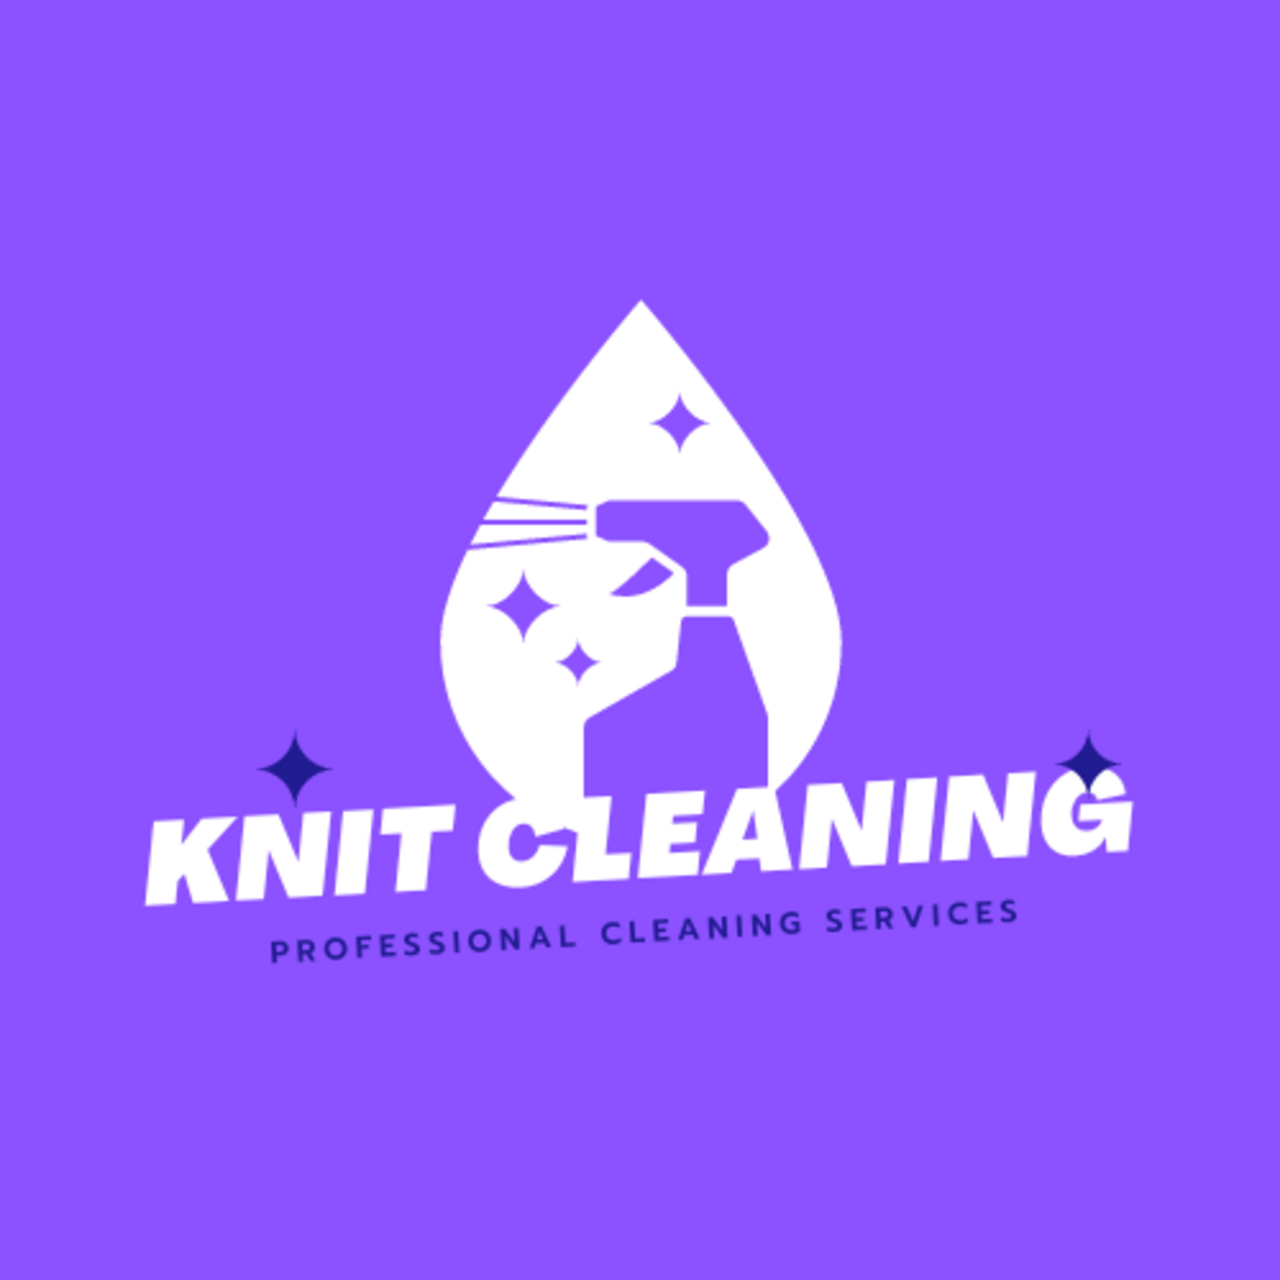 Knit cleaning services's logo